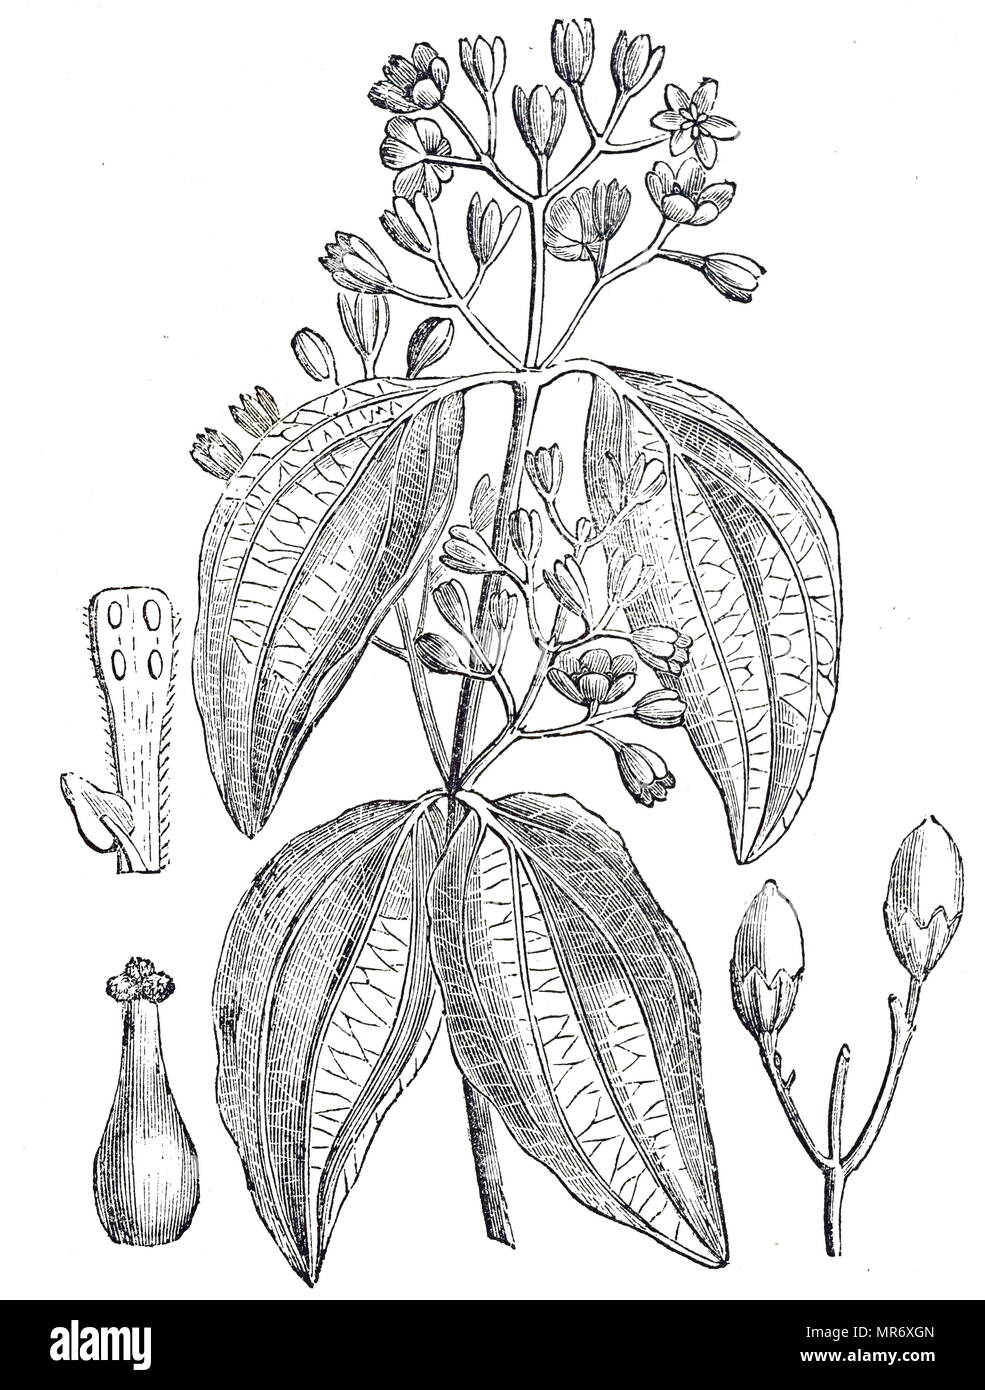 Engraving depicting part of a true cinnamon tree,  a small evergreen tree belonging to the family Lauraceae, native to Sri Lanka. Among other species, its inner bark is used to make cinnamon. Dated 19th century Stock Photo